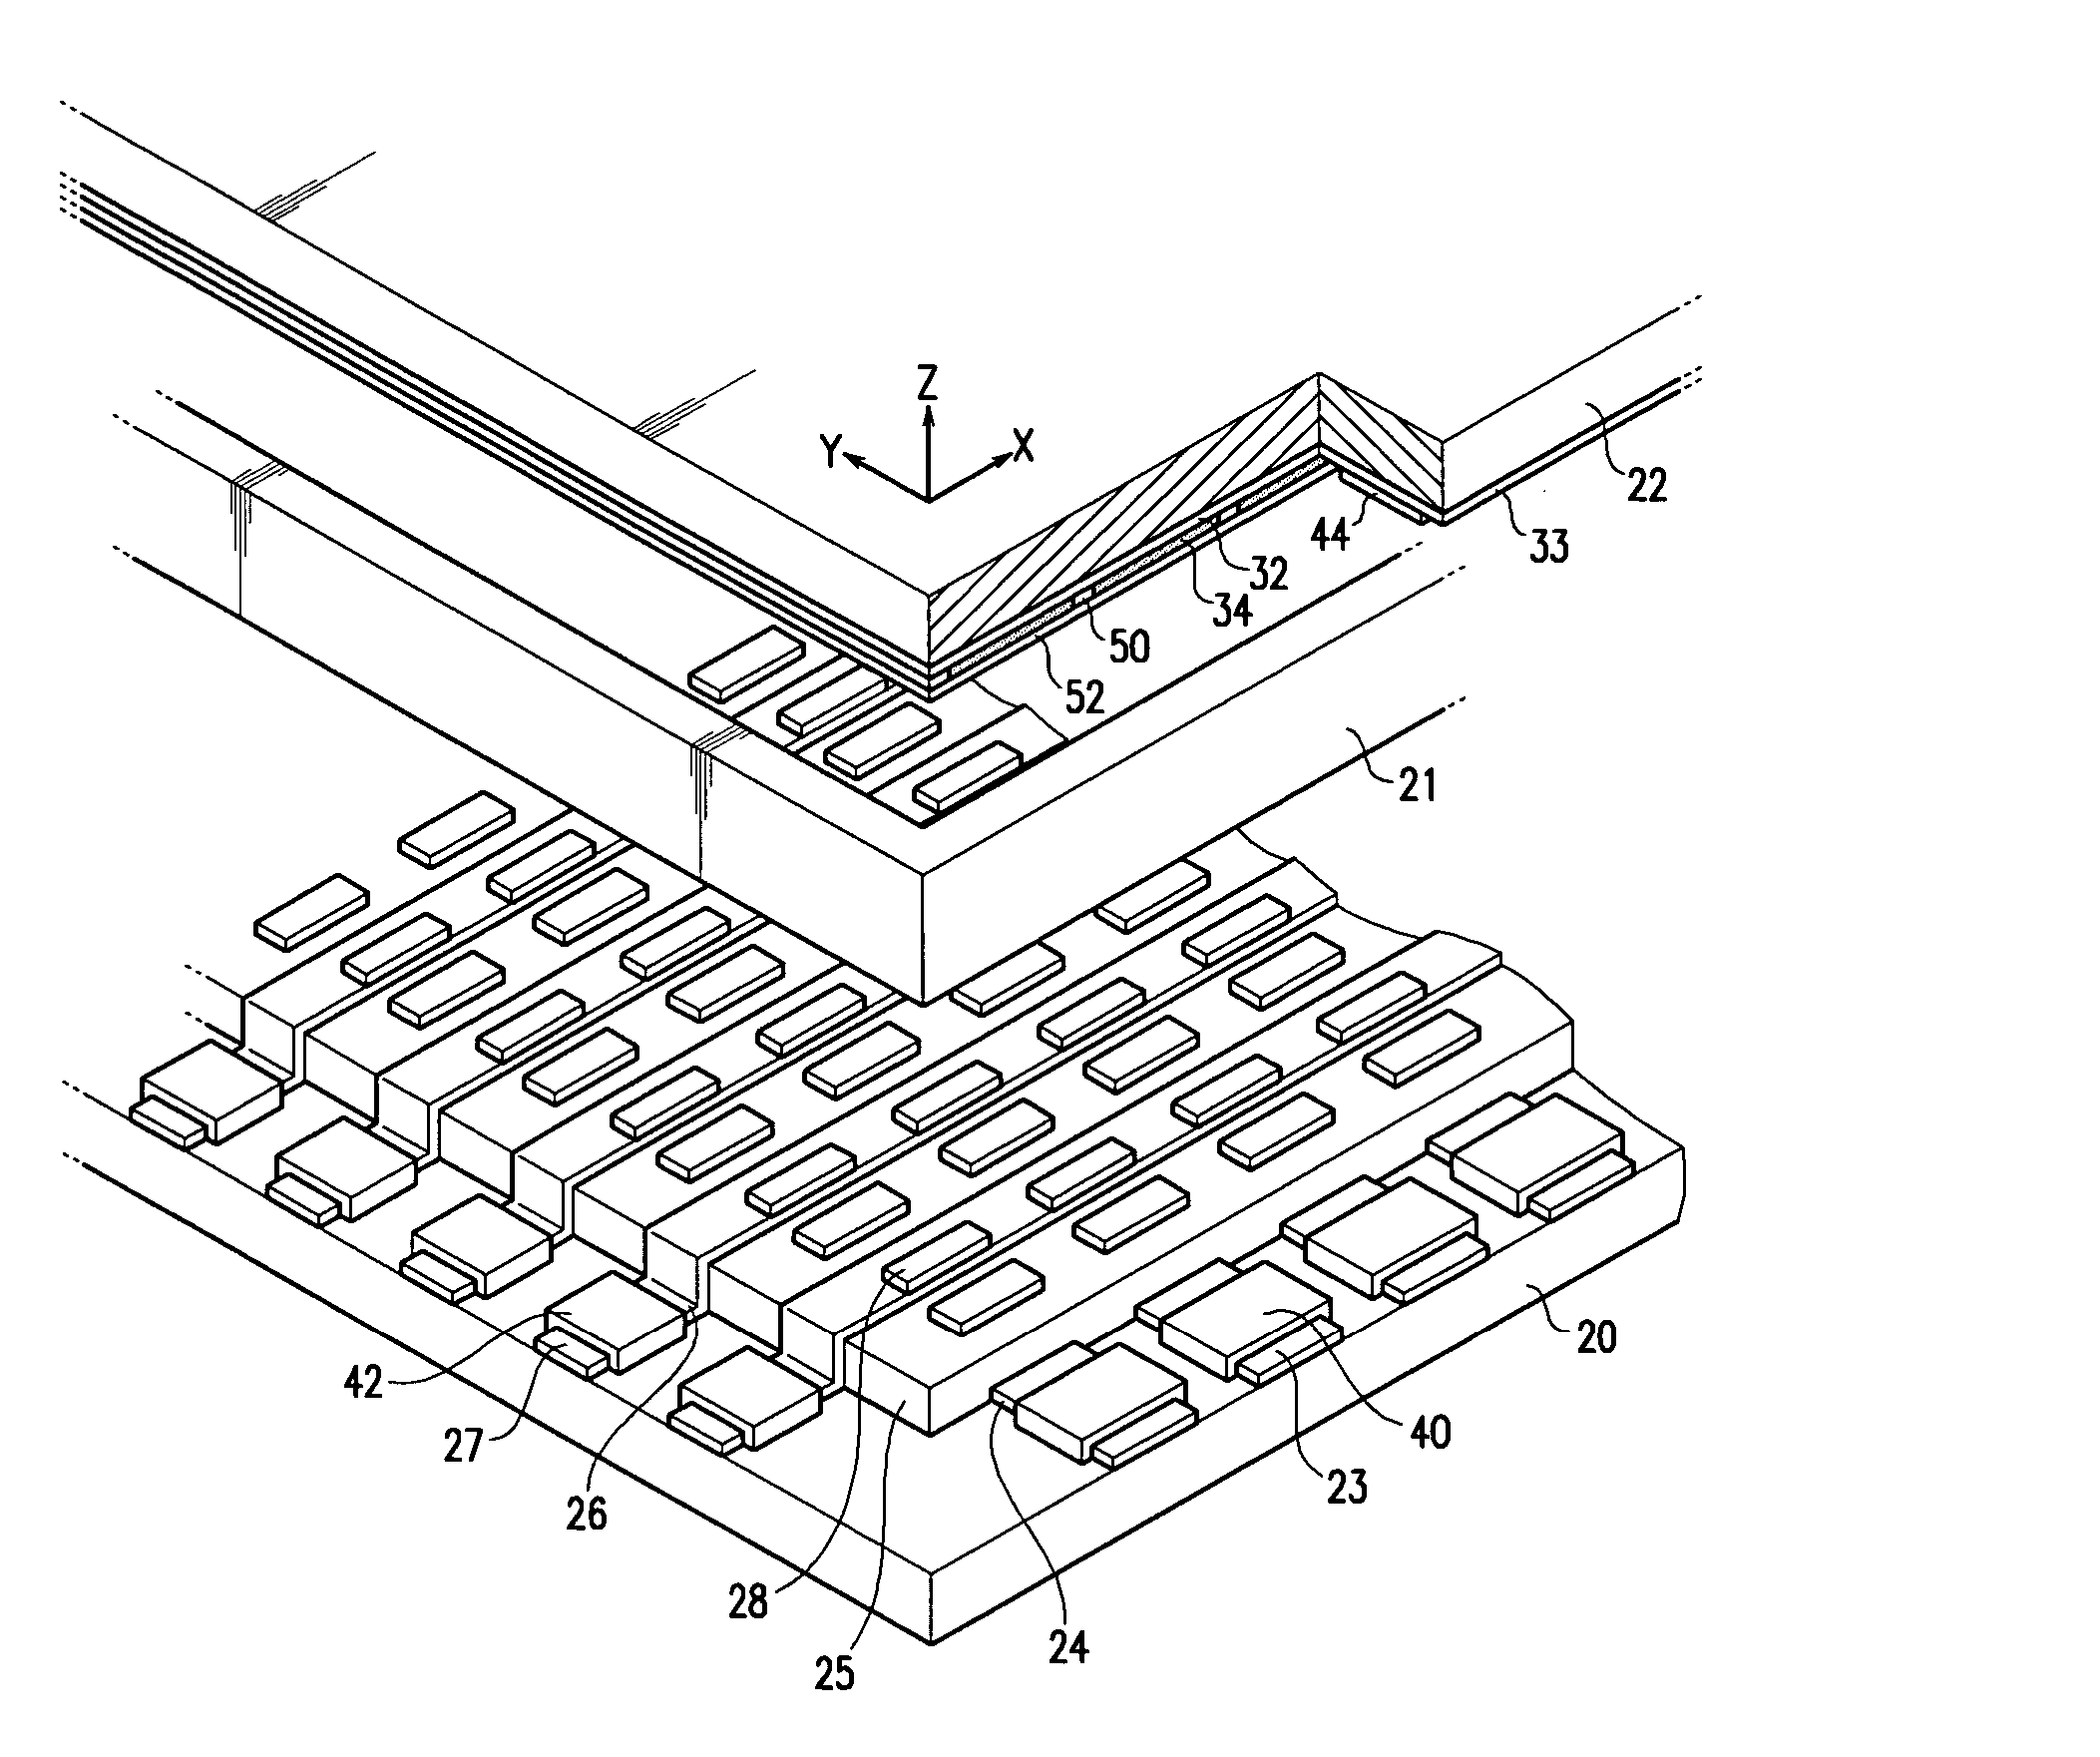 Flat panel display device and method of manufacturing the same